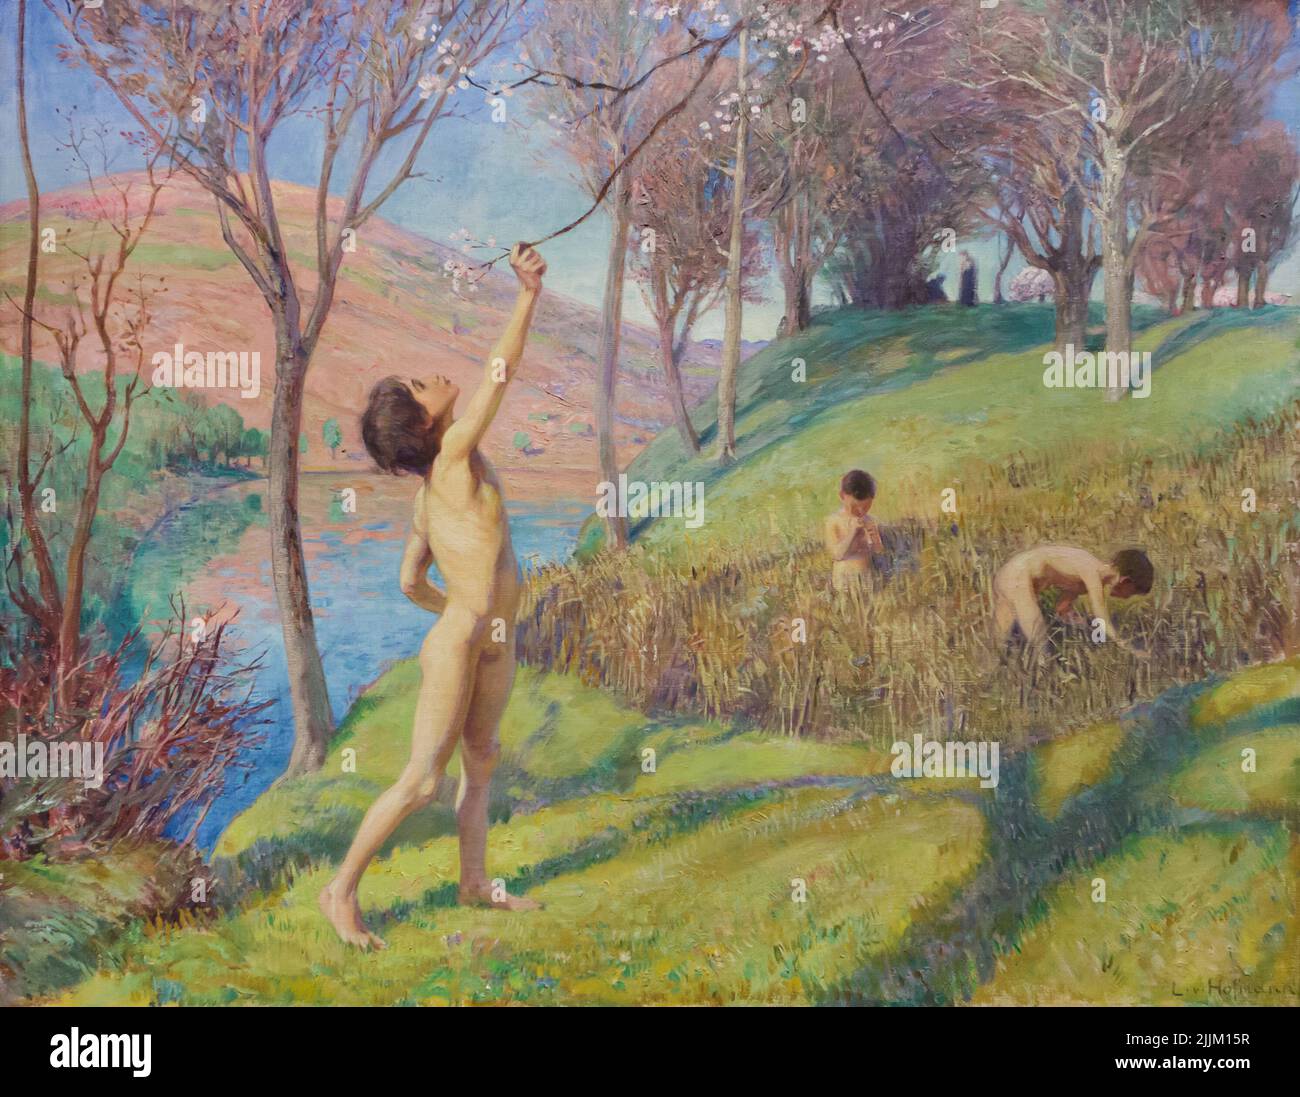 Painting 'Spring' by German symbolist painter Ludwig von Hofmann (1895) on display at the special exhibition in the Gаlеriе Nеuе Mеistеr (Nеw Маstеrs Gаllеry) in the Аlbеrtinum in Drеsdеn, Gеrmаny. The exhibition 'Escapism and Modernity' devoted to German art around 1900 runs till 15 January 2023. Stock Photo